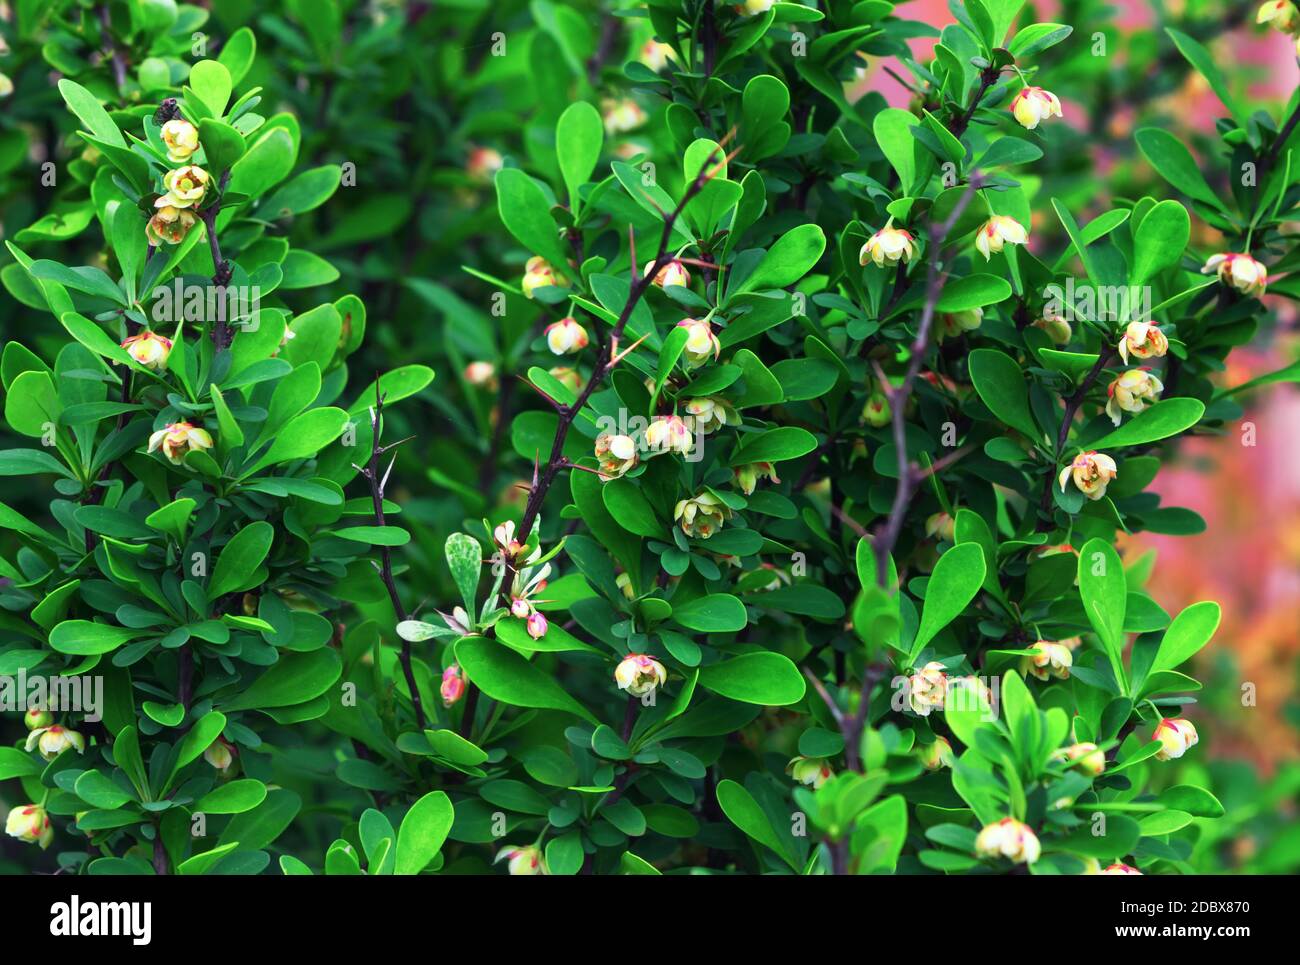 Beautiful small flowers on young green branches of the Japanese barberry bush. Berberis Thunbergii blossoms in the spring garden. Selective focus. Stock Photo